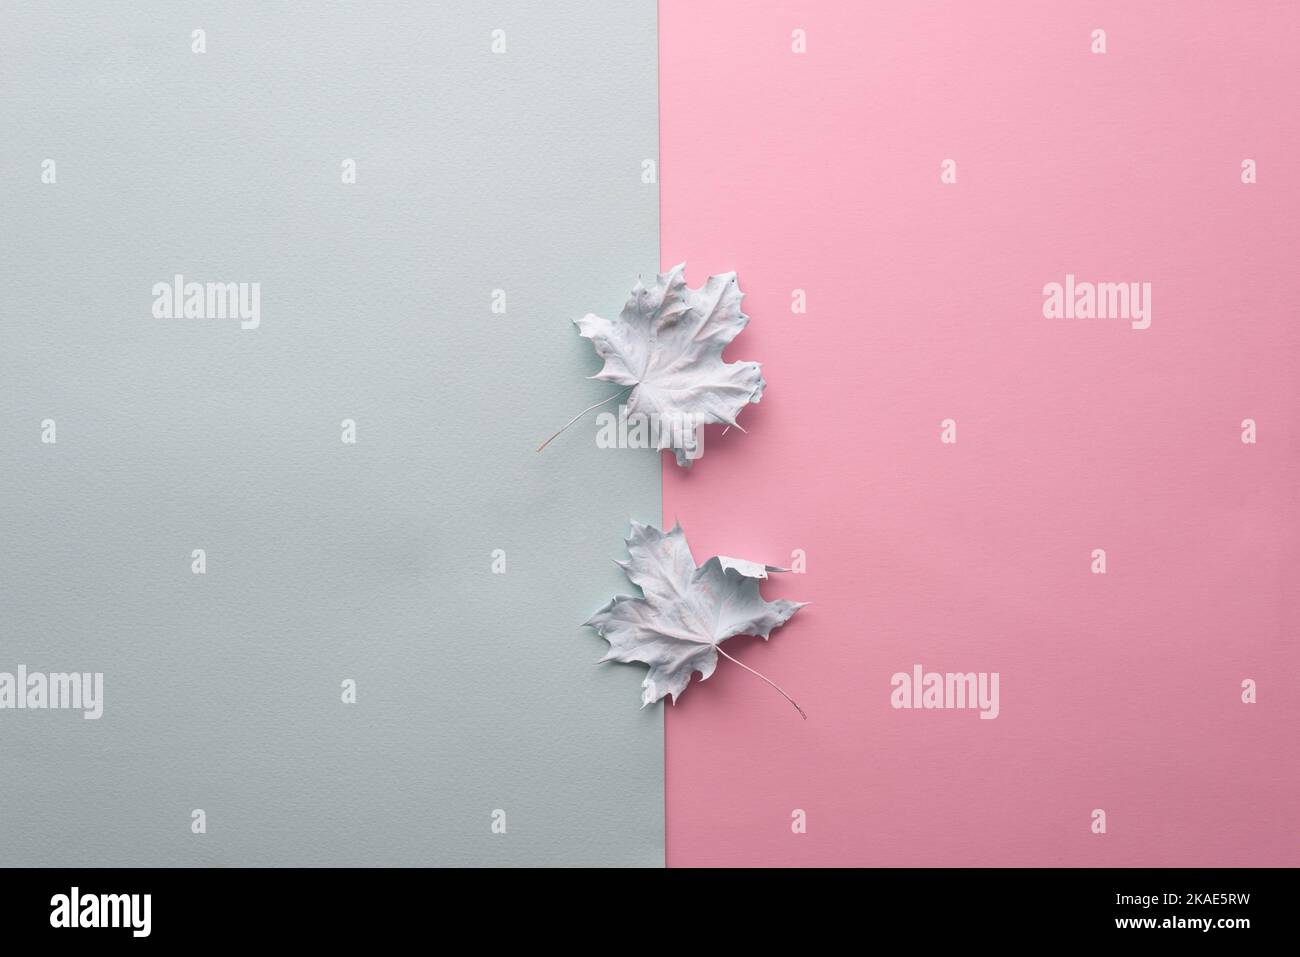 minimal concept of autumn leaves in blue paint on pink background. Stock Photo